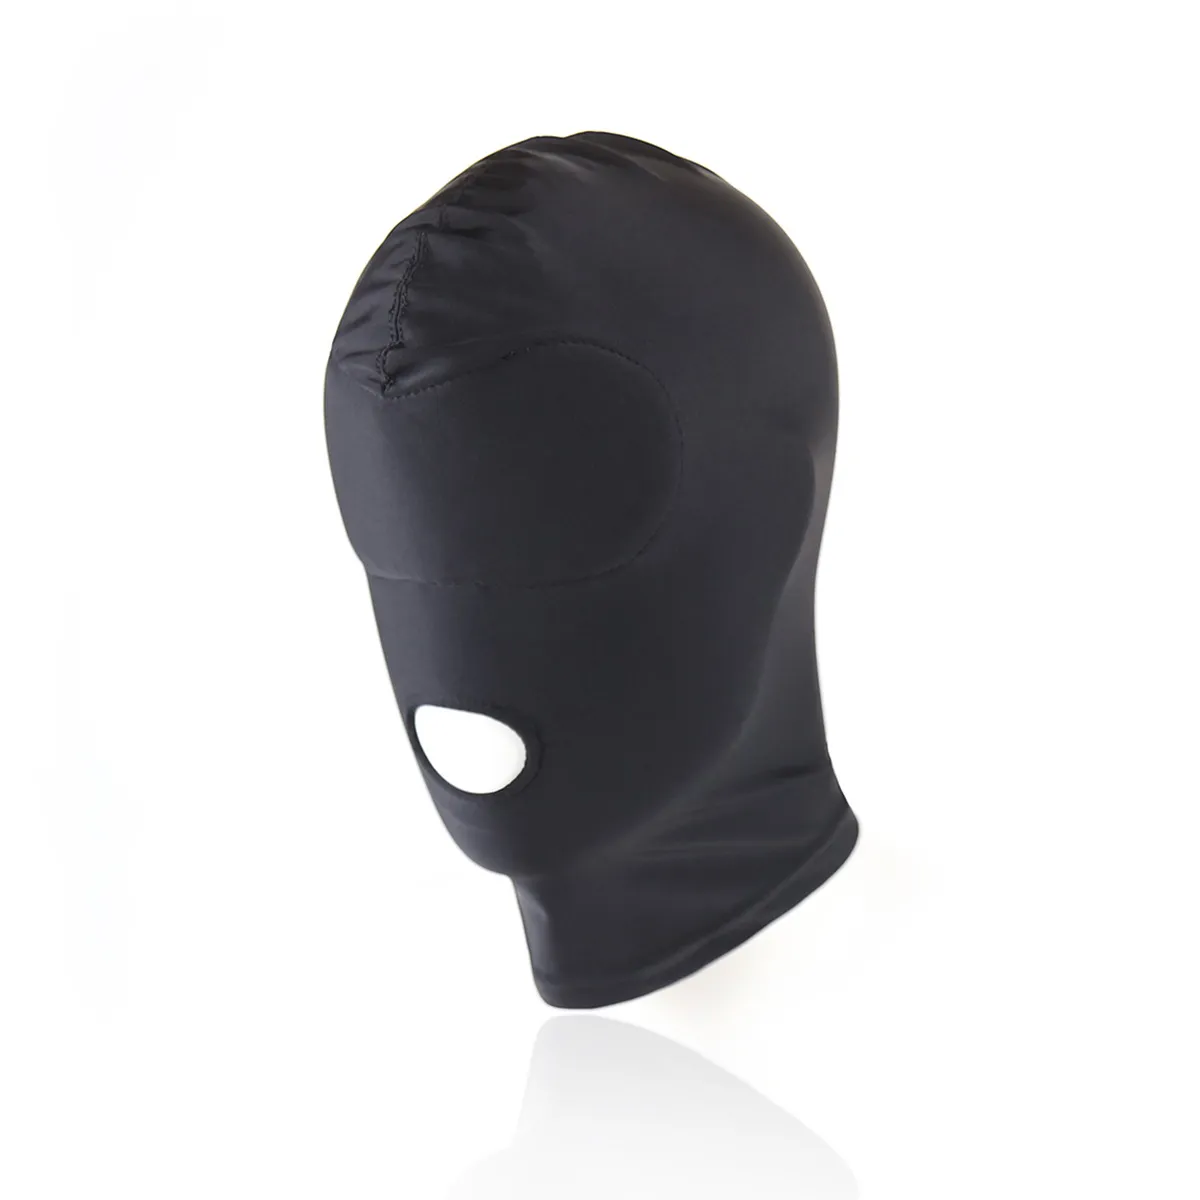 Sexy PU Leather Latex Hood Black Mask 4 tyles Breathable Headpiece Fetish BDSM Adult for party8111859